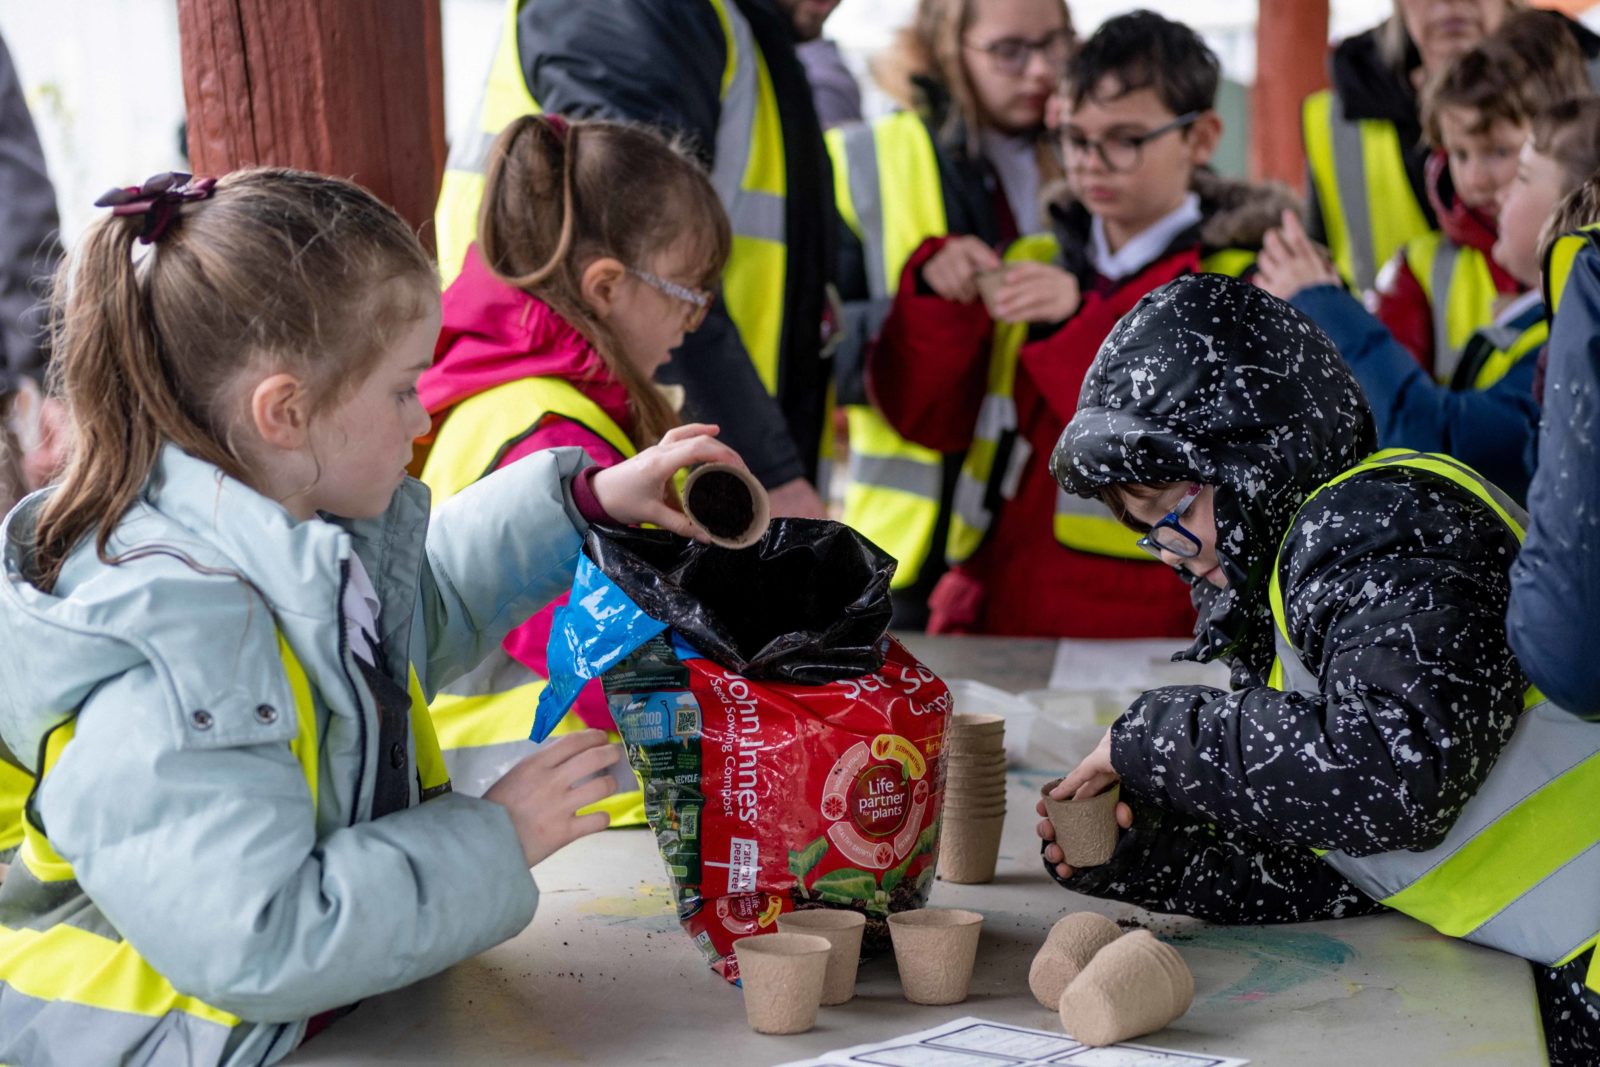 Schoolchildren gather around a table, filling plant pots with soil.